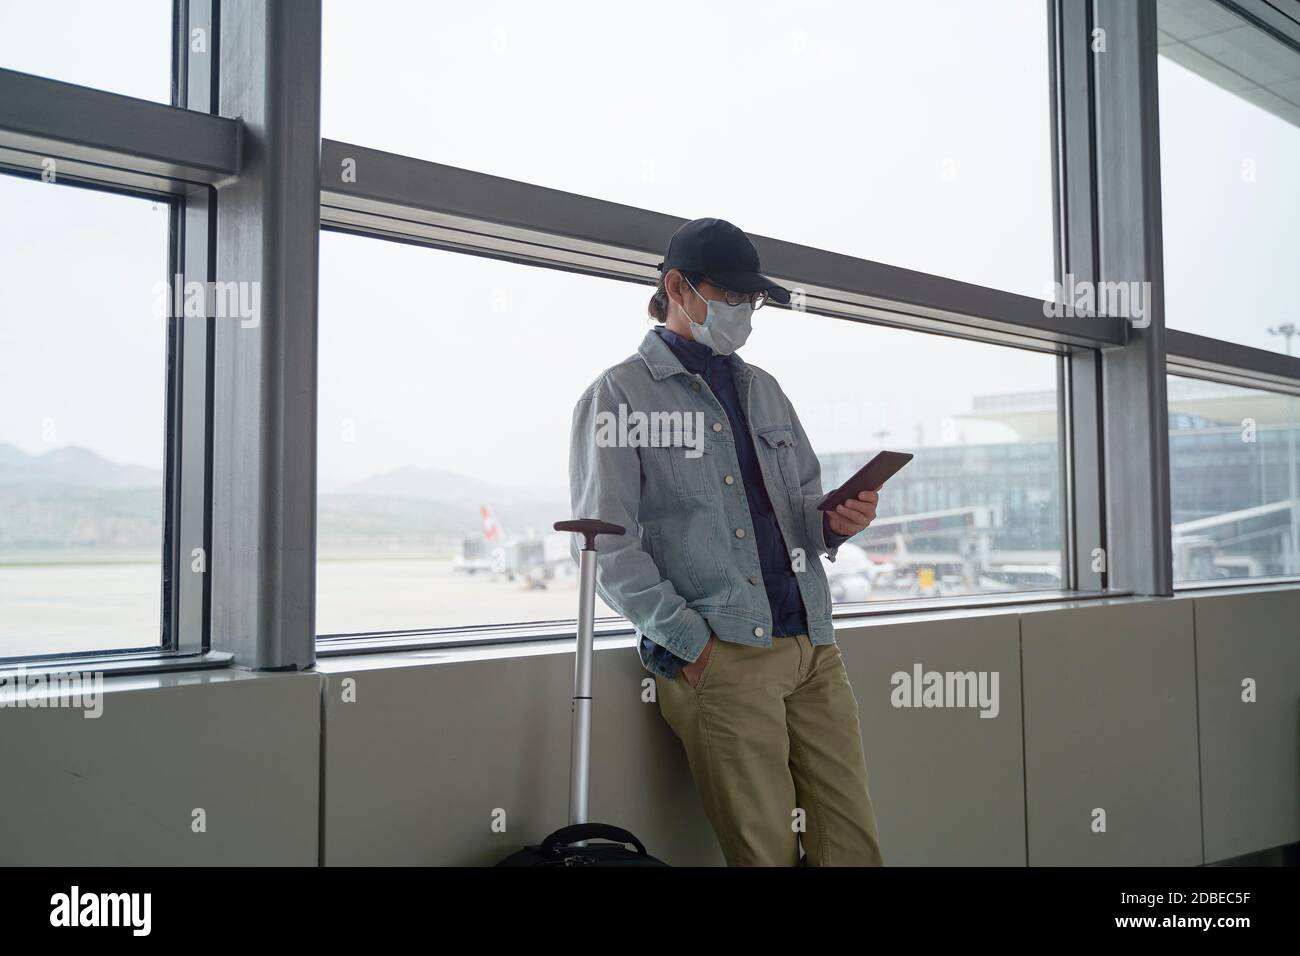 young asian man male air traveler reading e-book using a e-reader while waiting for boarding in airport terminal building Stock Photo